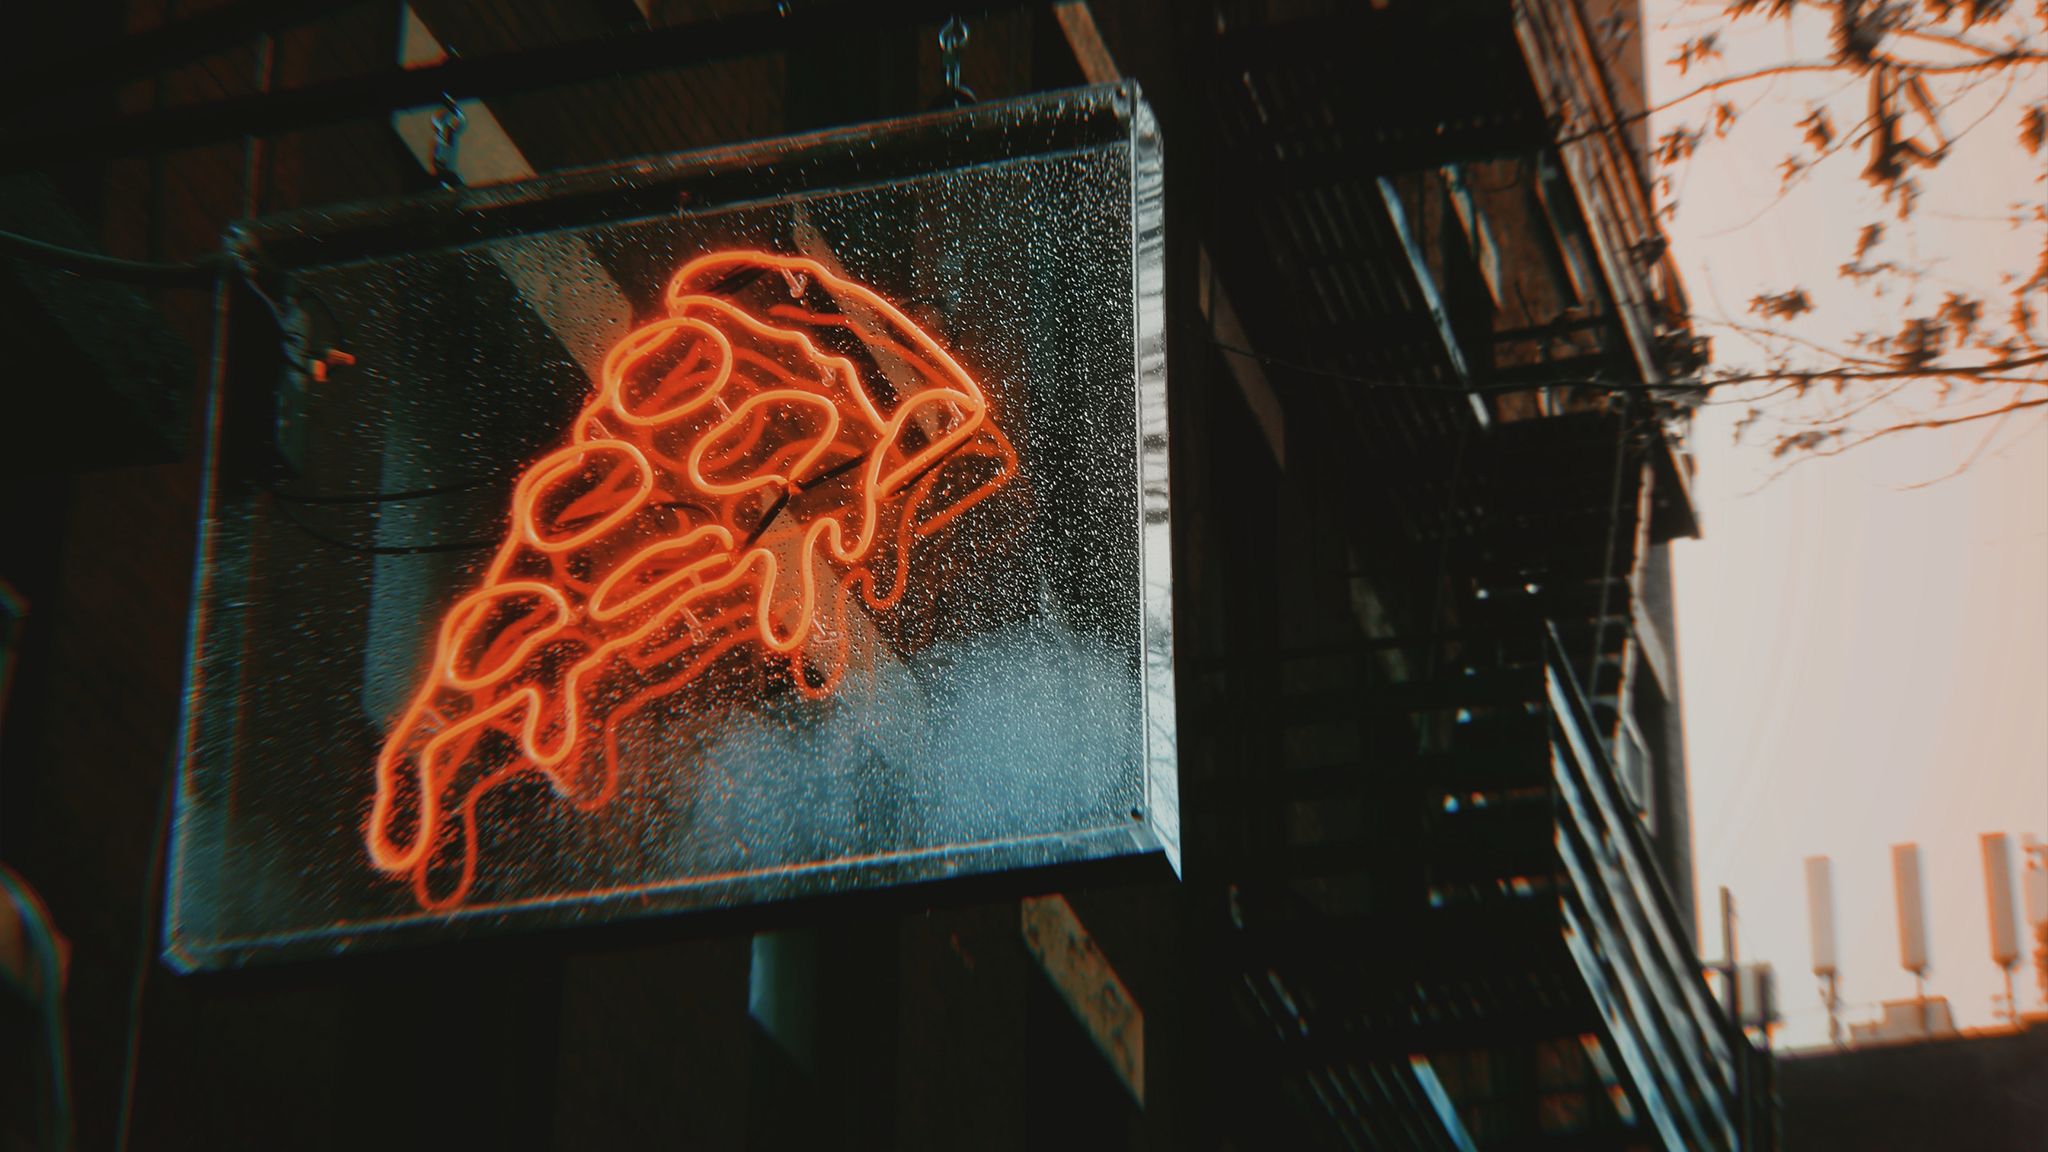 Neon sign of a pizza over a city's view